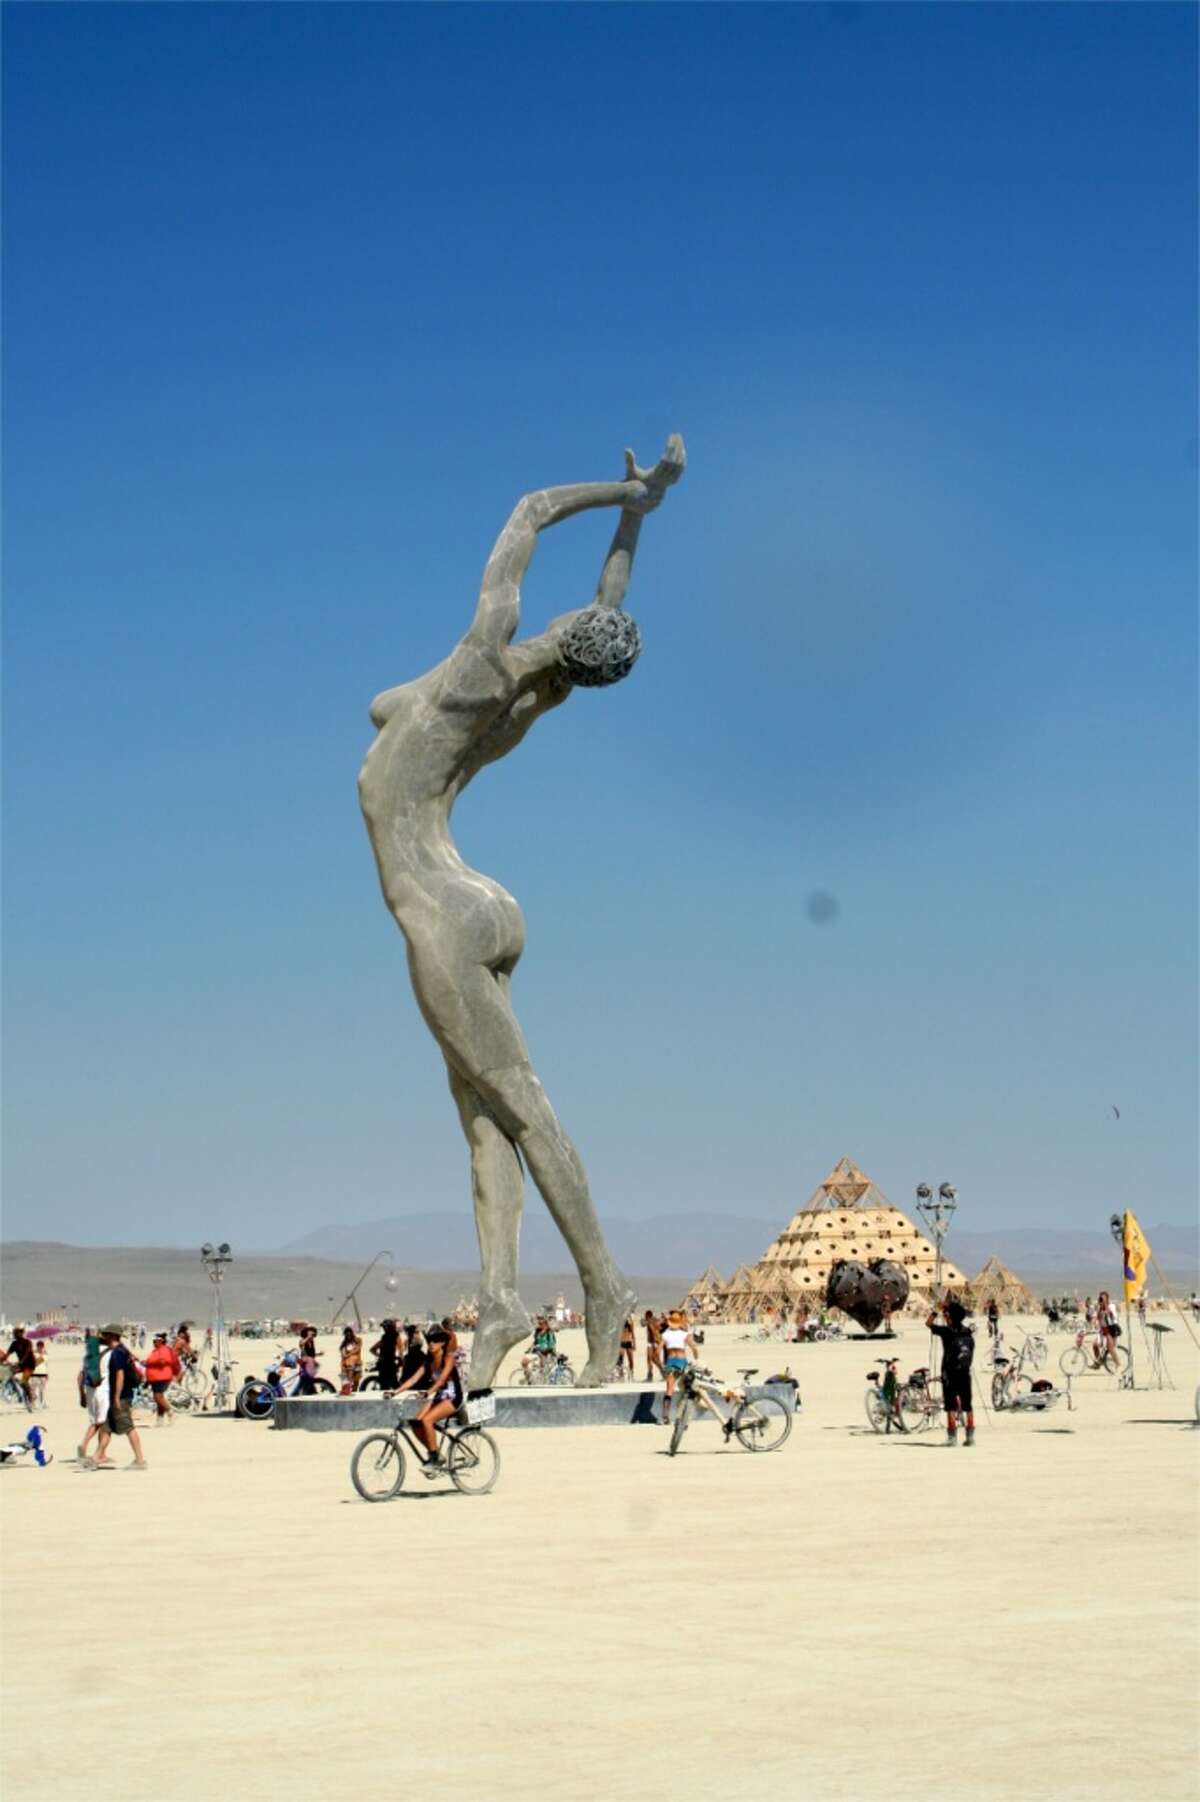 Giant statue of naked woman being installed on California 